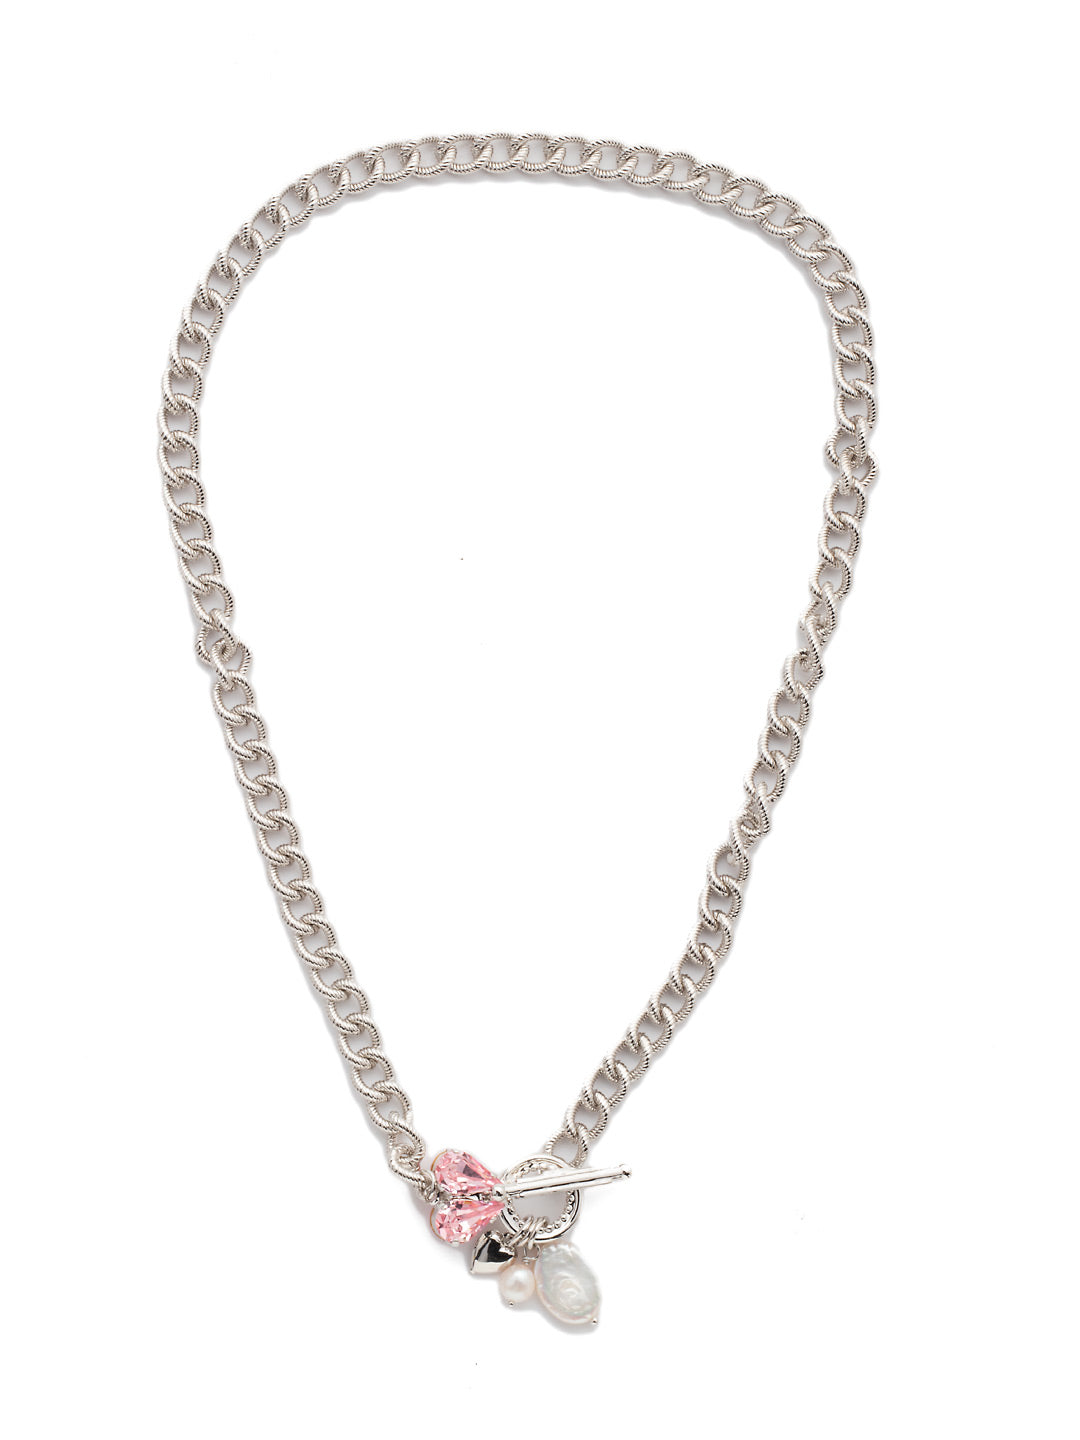 Laguna Pendant Necklace - NER5RHPOM - <p>The Laguna Pendant Necklace makes a strong statement with its metal links, but softens at the center with shimmering crystal and silver hearts joined by freshwater pearl accents. From Sorrelli's Pink Ombre collection in our Palladium Silver-tone finish.</p>